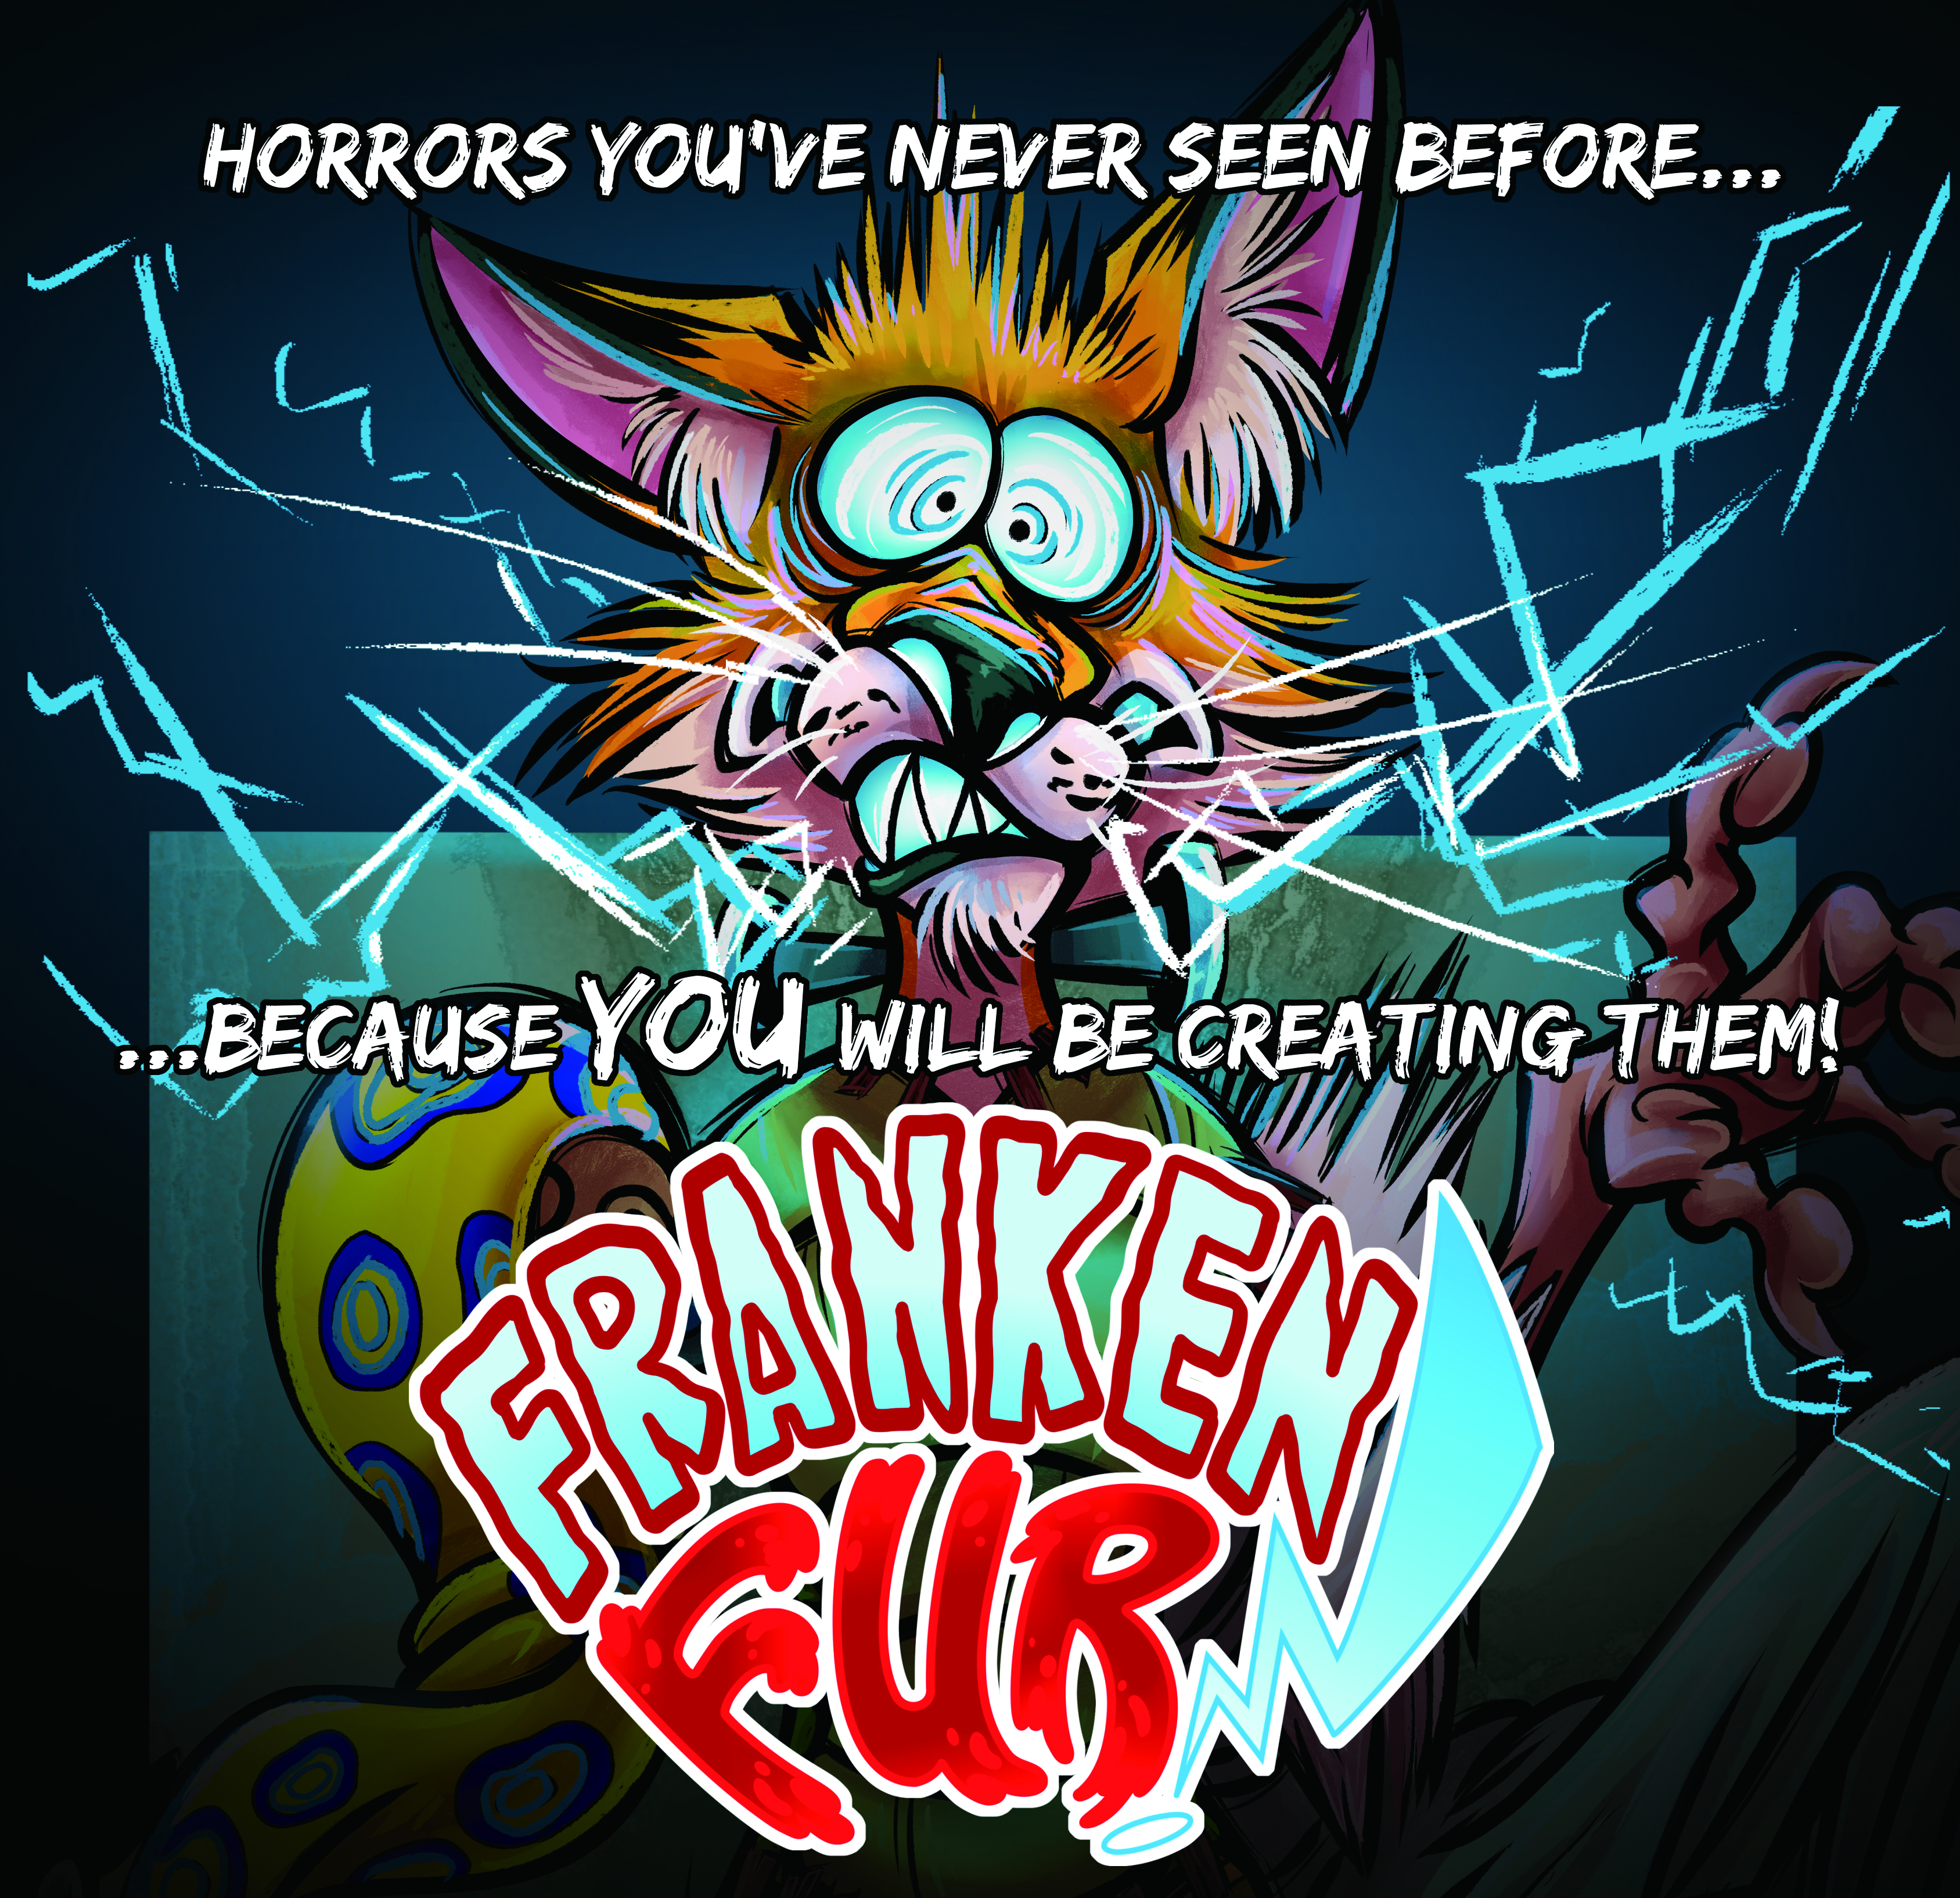 This is a promotional image for Frankenfur which features their tagline “Horrors you’ve never seen before… because YOU will be creating them!”. The image features a werewolf being electrocuted by a yellow eel.